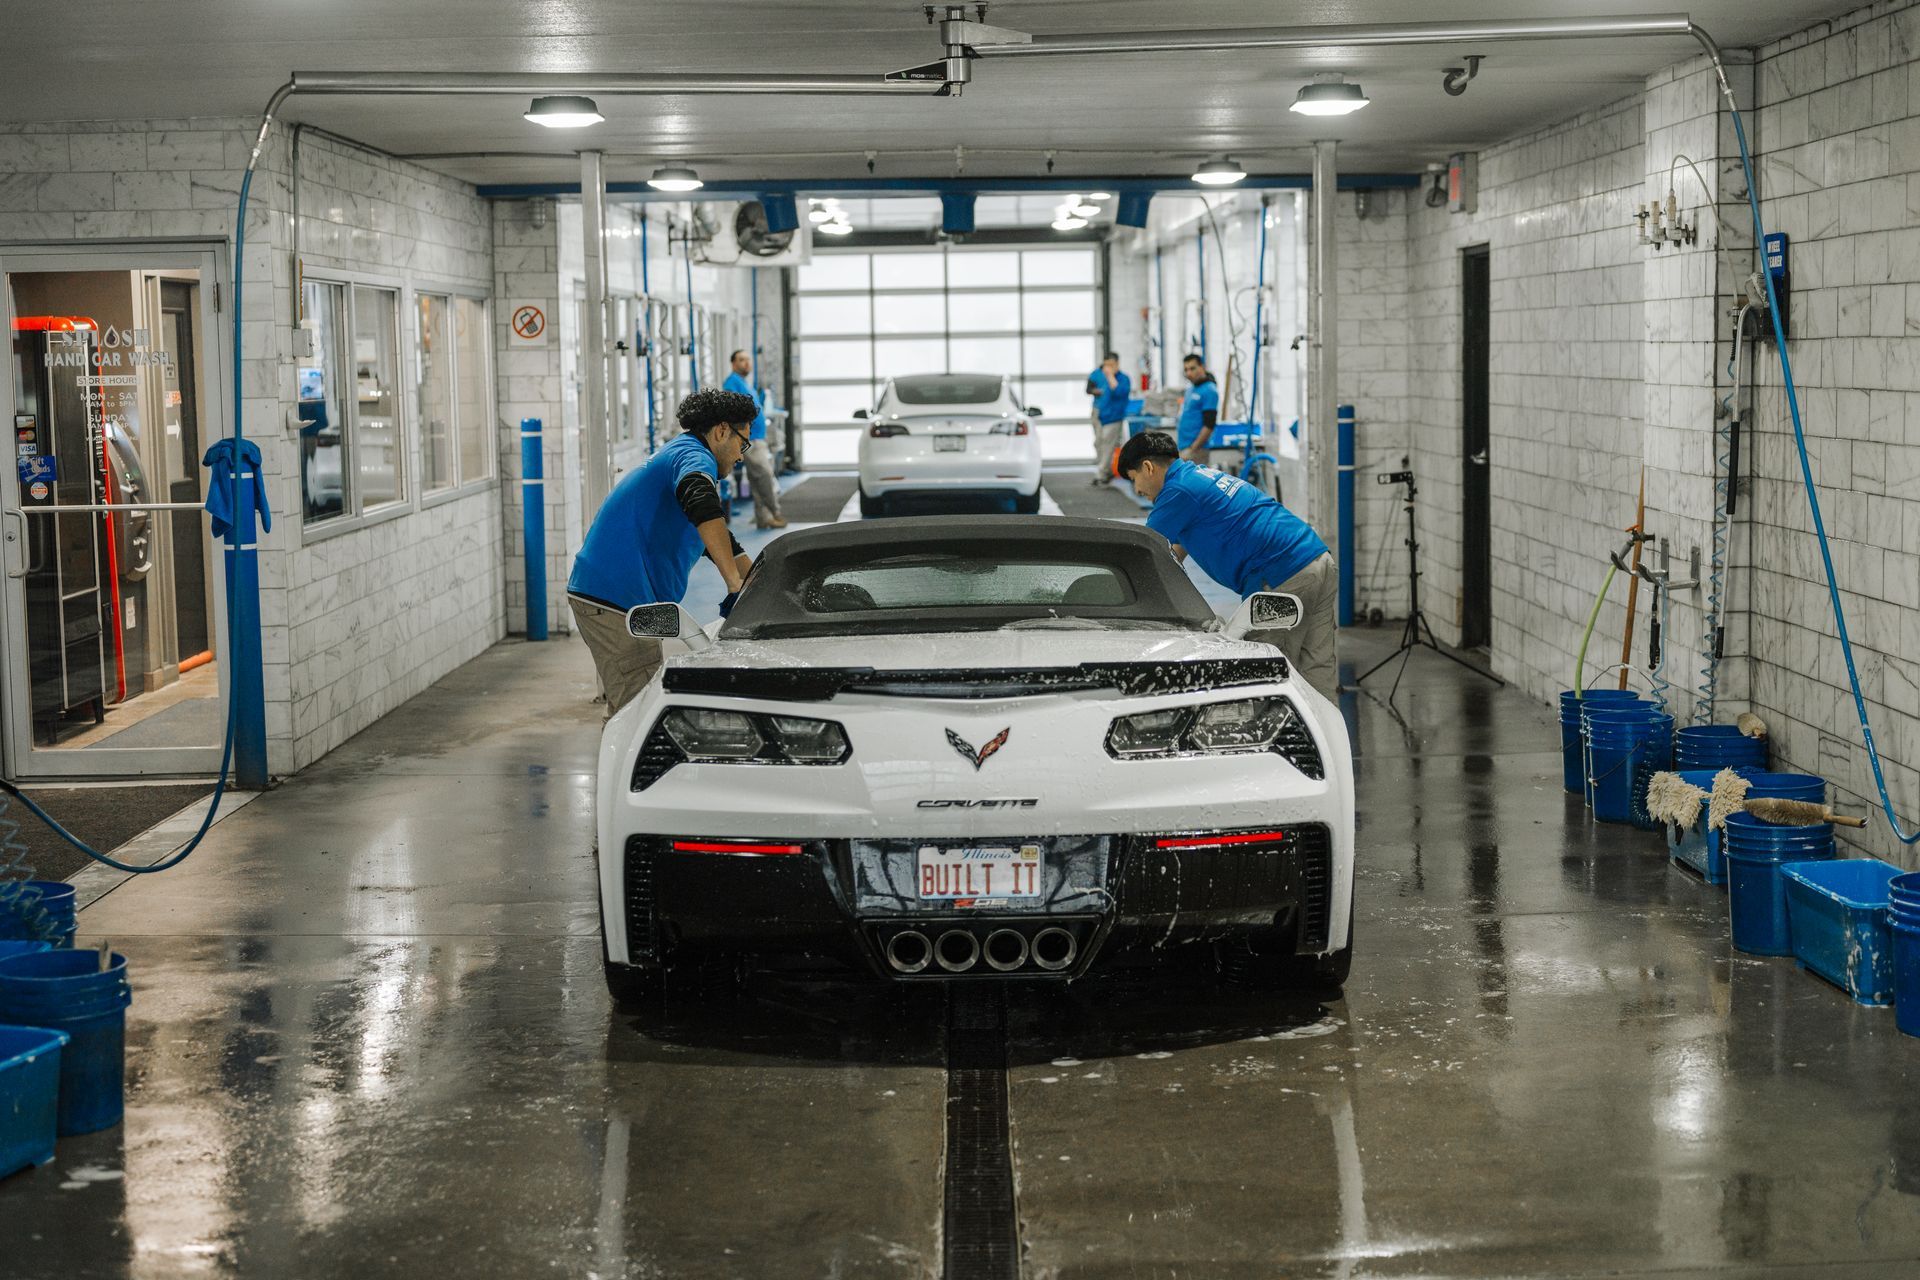 A white corvette is being washed in a car wash.